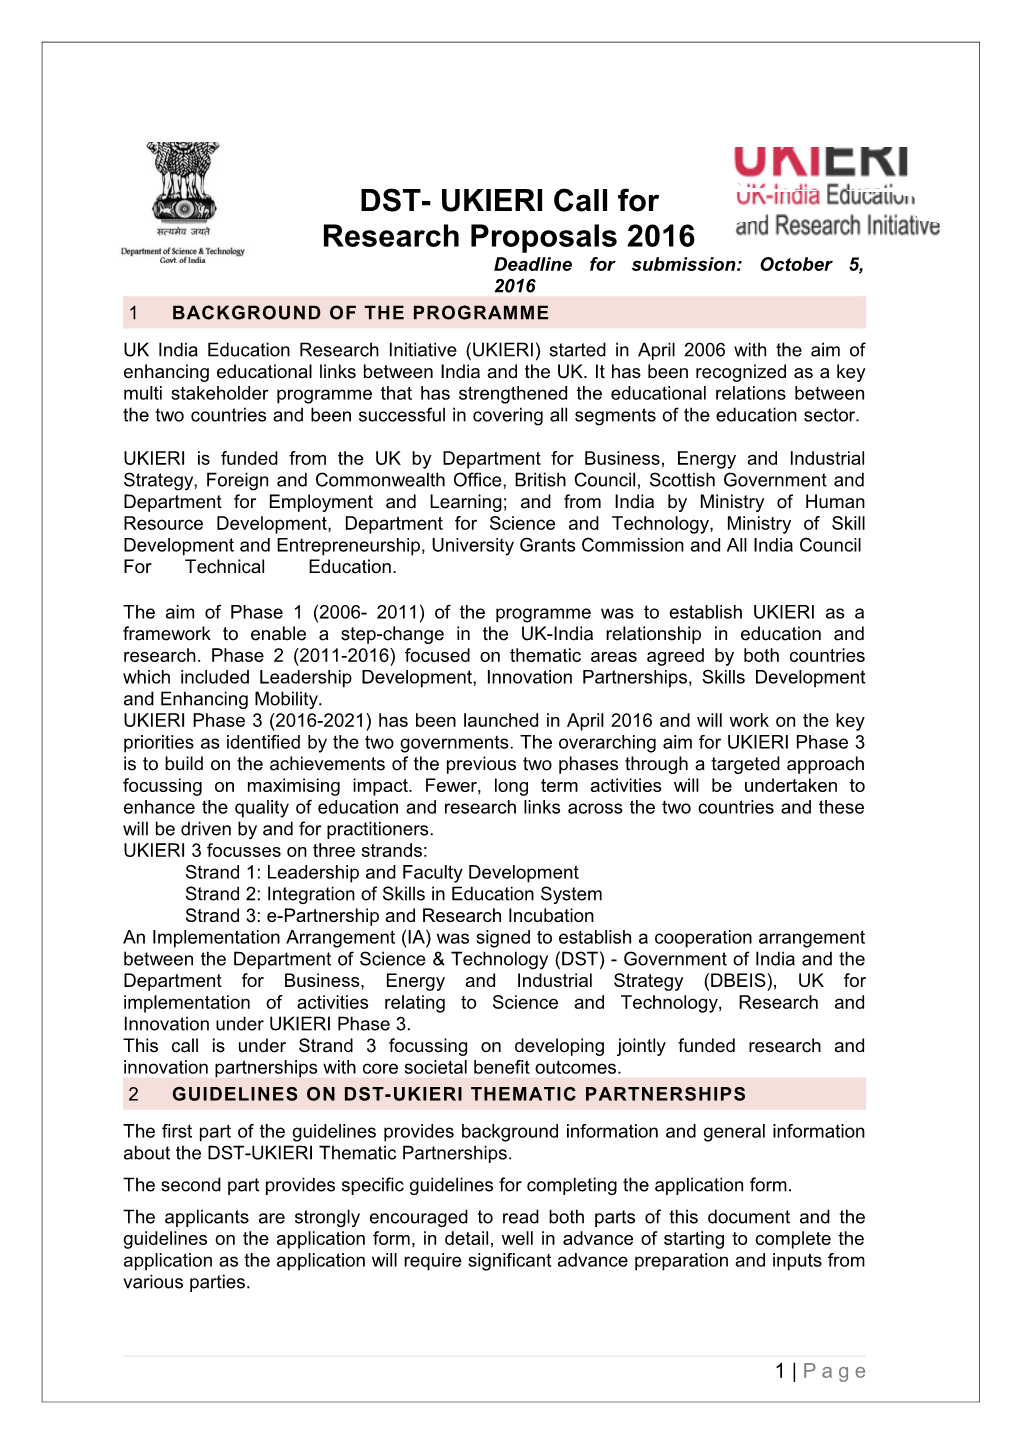 DST- UKIERI Call for Research Proposals 2016